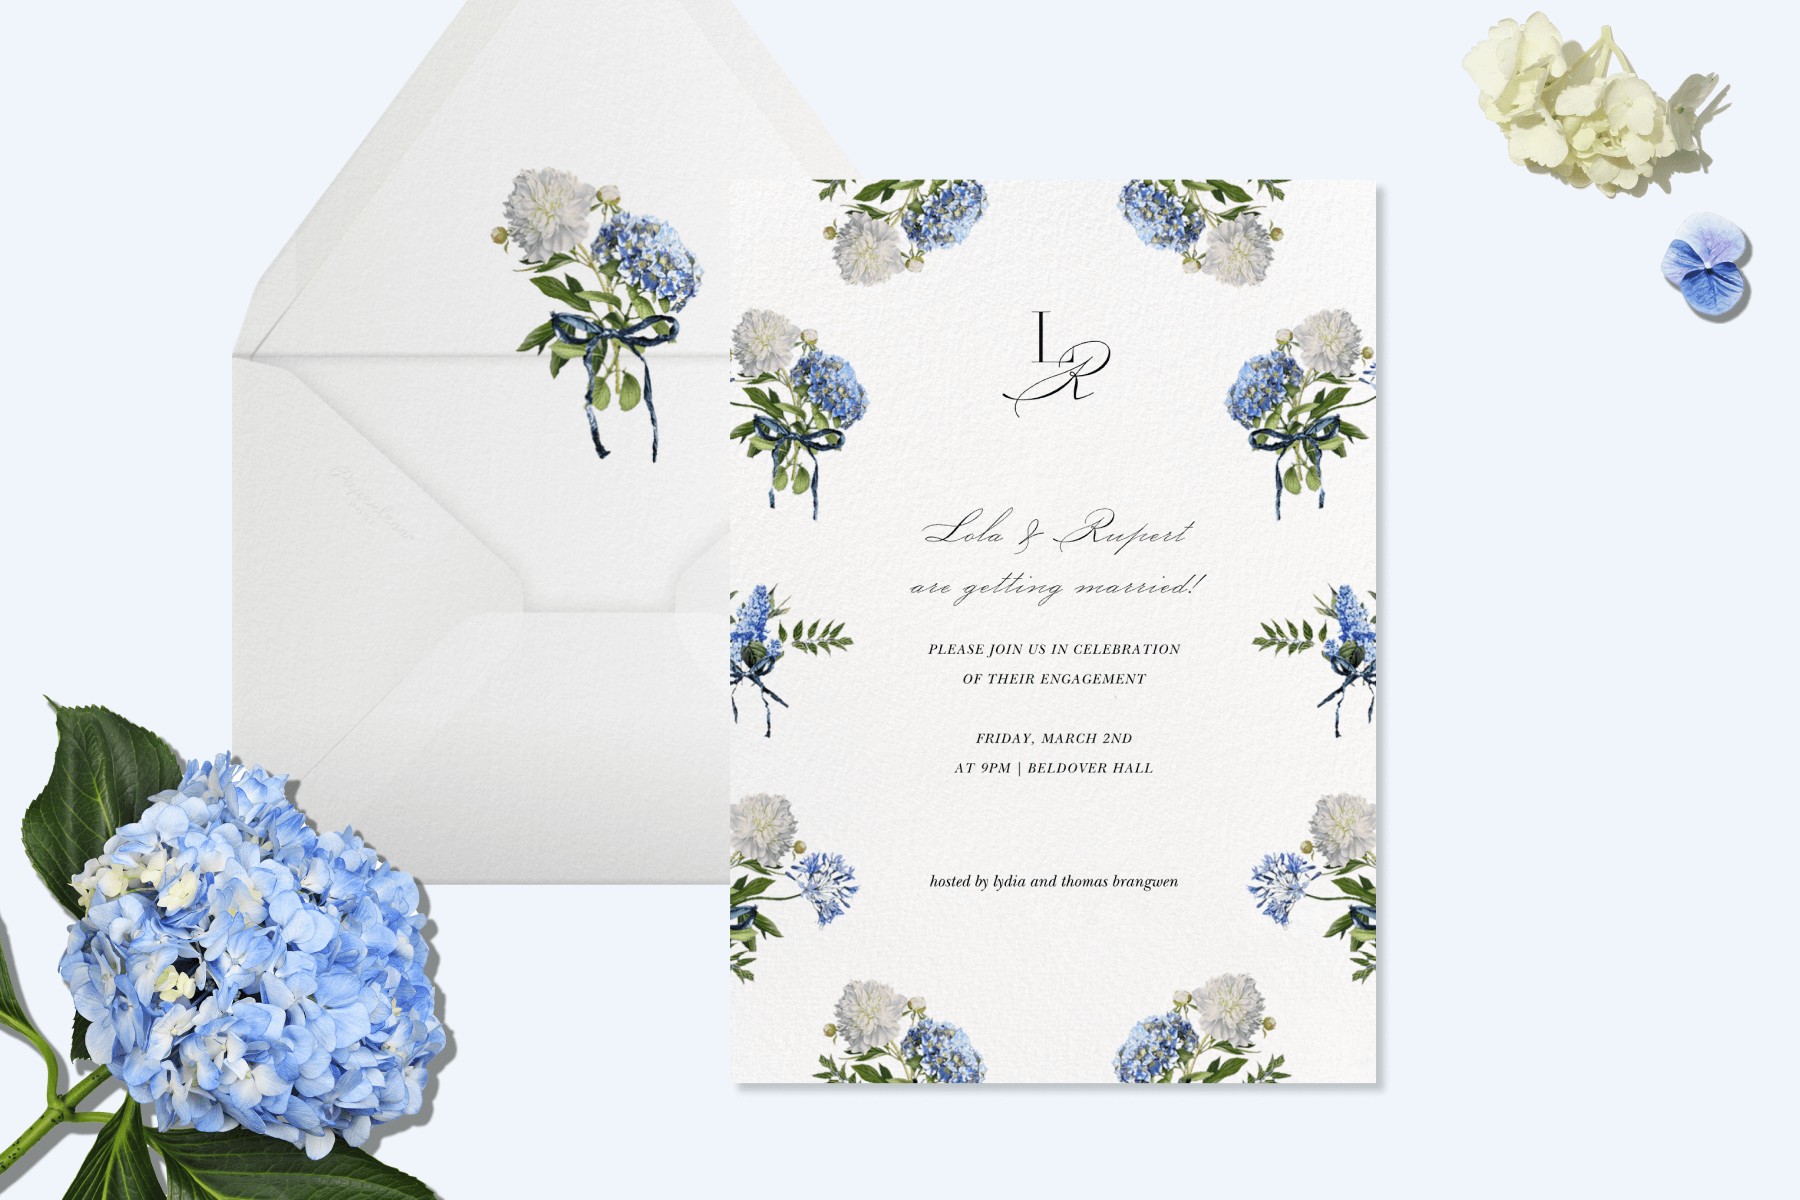 Invitation with a mixture of white and light blue hydrangeas framing the text on a light blue background